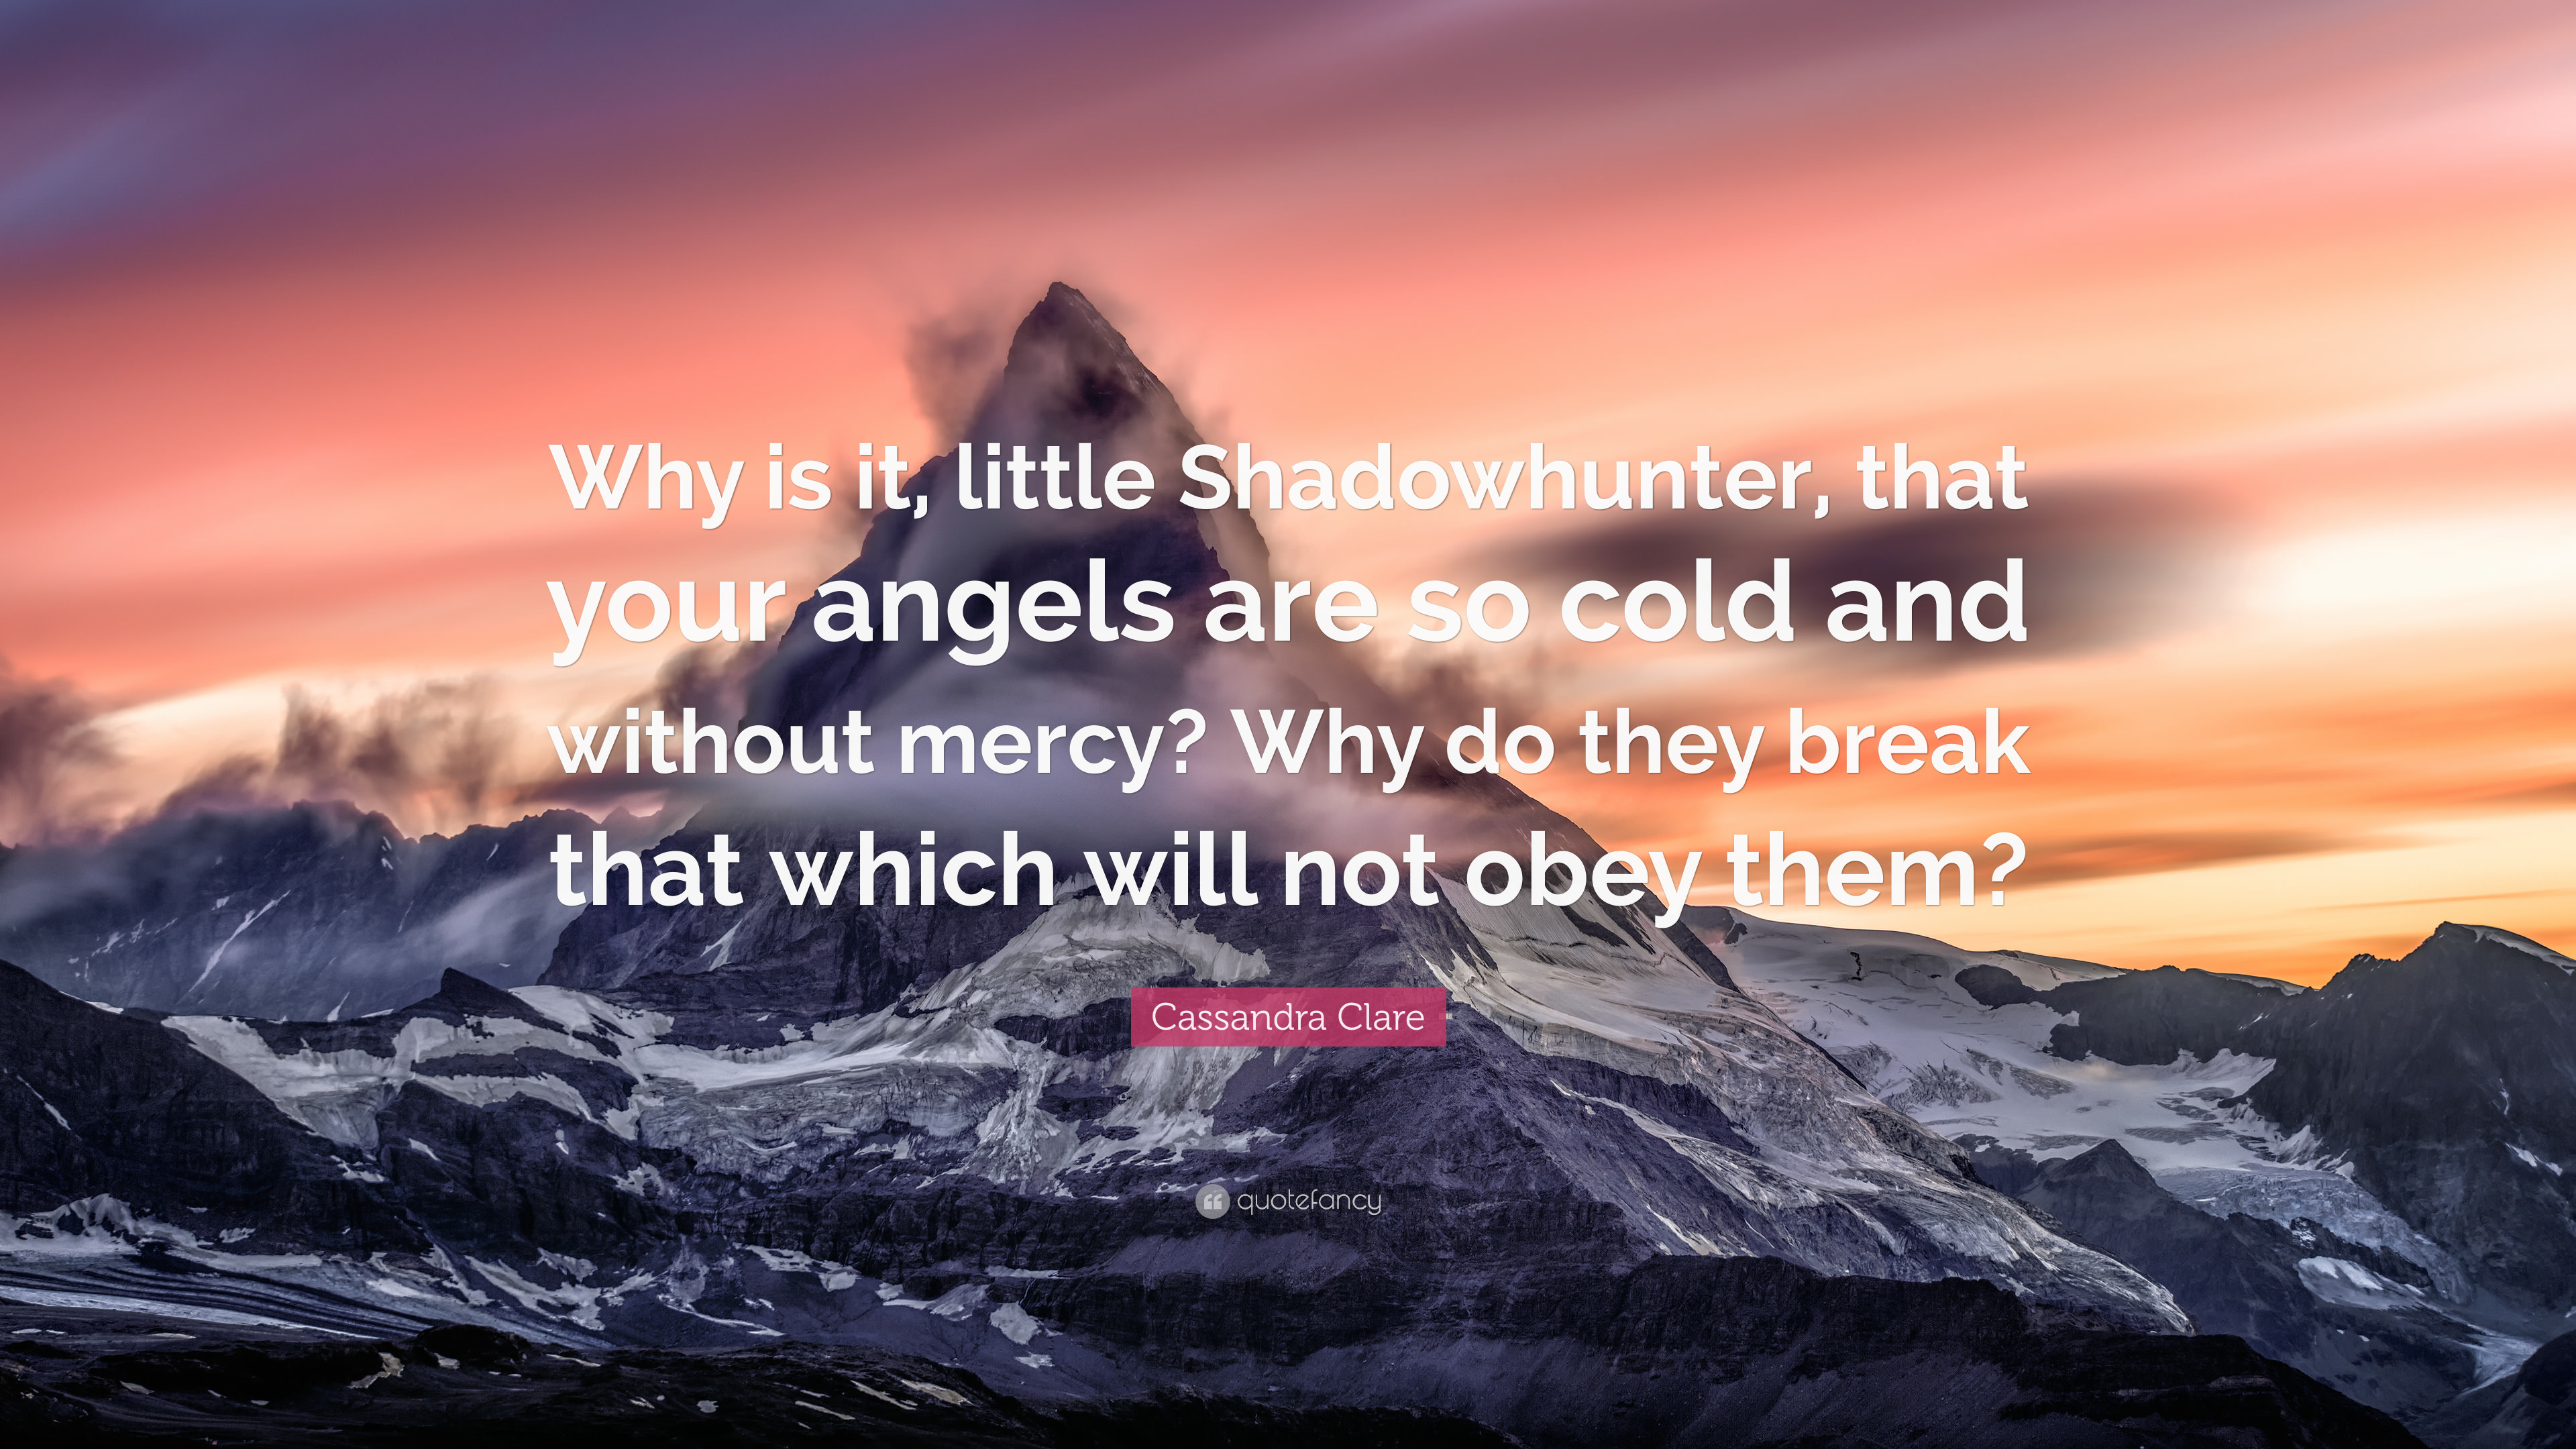 3840x2160 Cassandra Clare Quote: “Why is it, little Shadowhunter, that your angels are